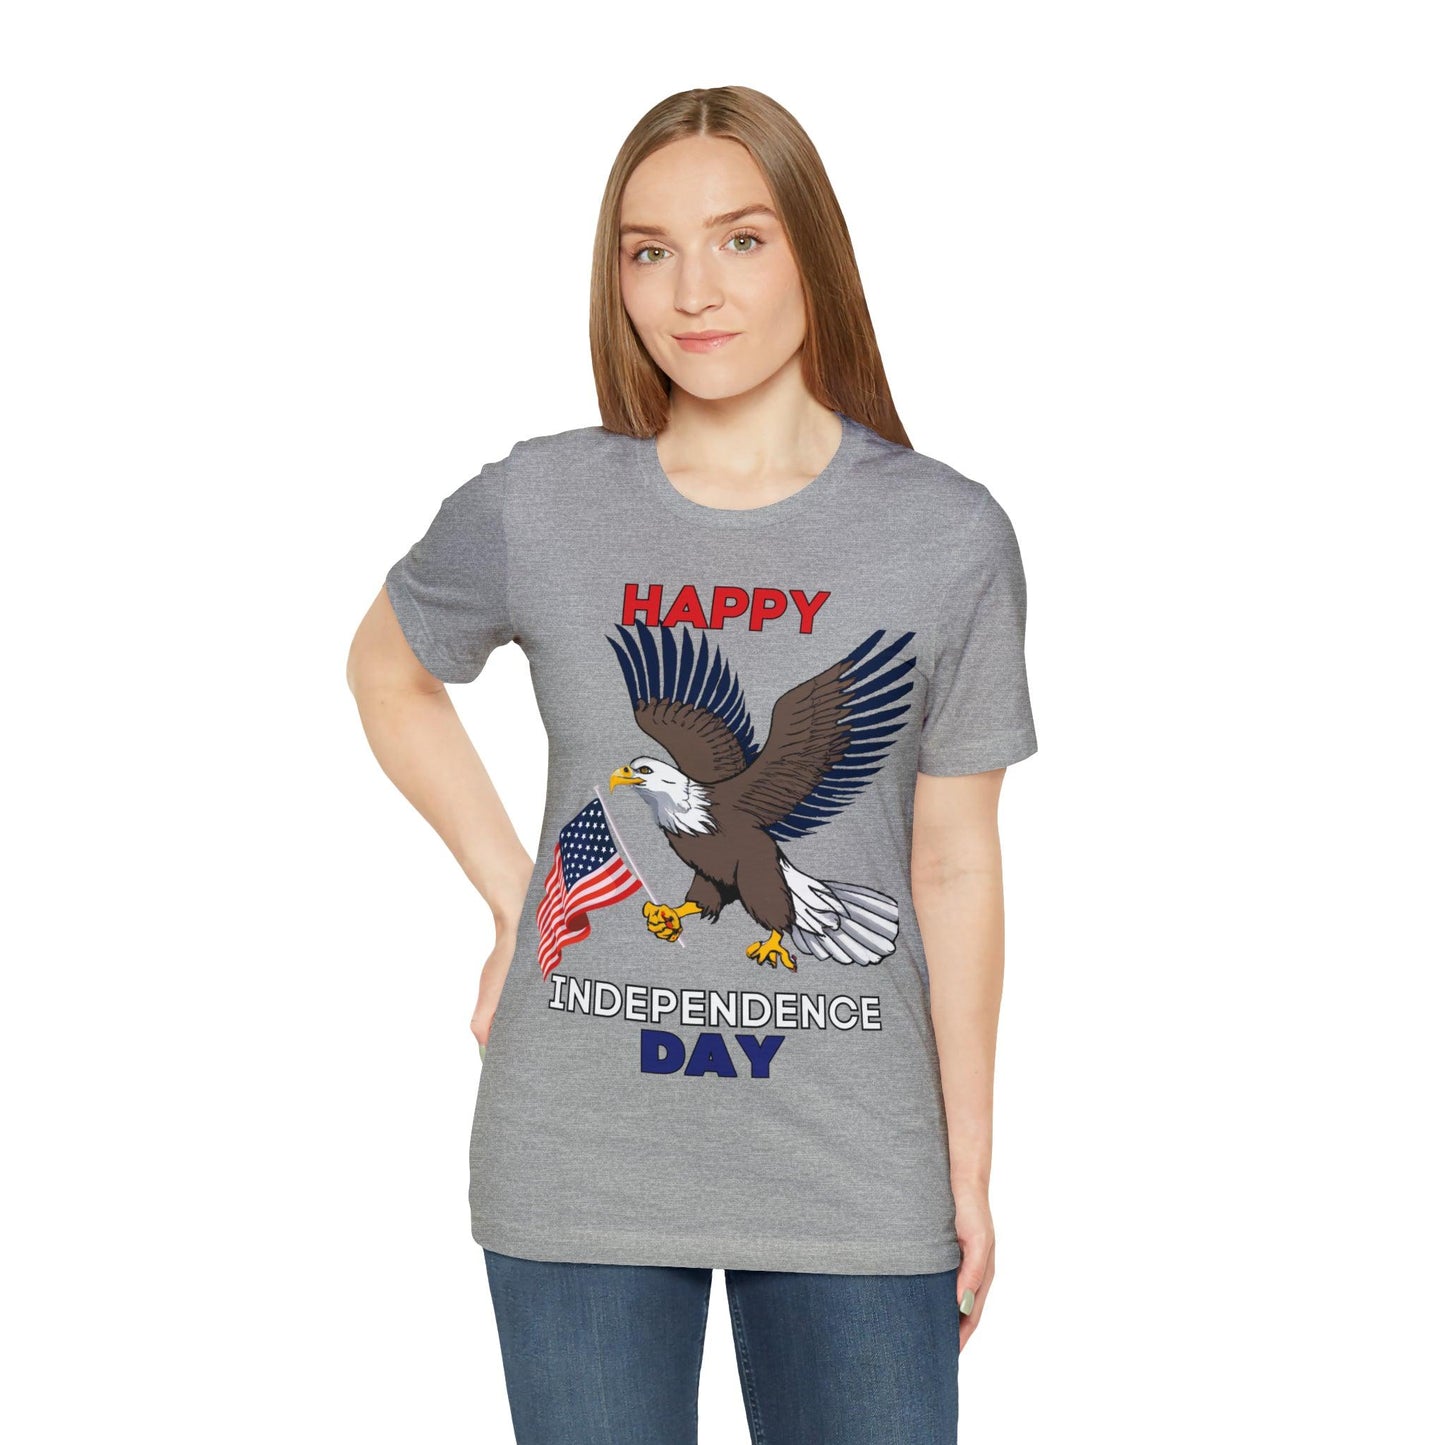 Show Your Patriotic Spirit with Happy Independence Day Shirts for Women and Men: 4th of July, USA Flag, Fireworks, Freedom, and More - Giftsmojo